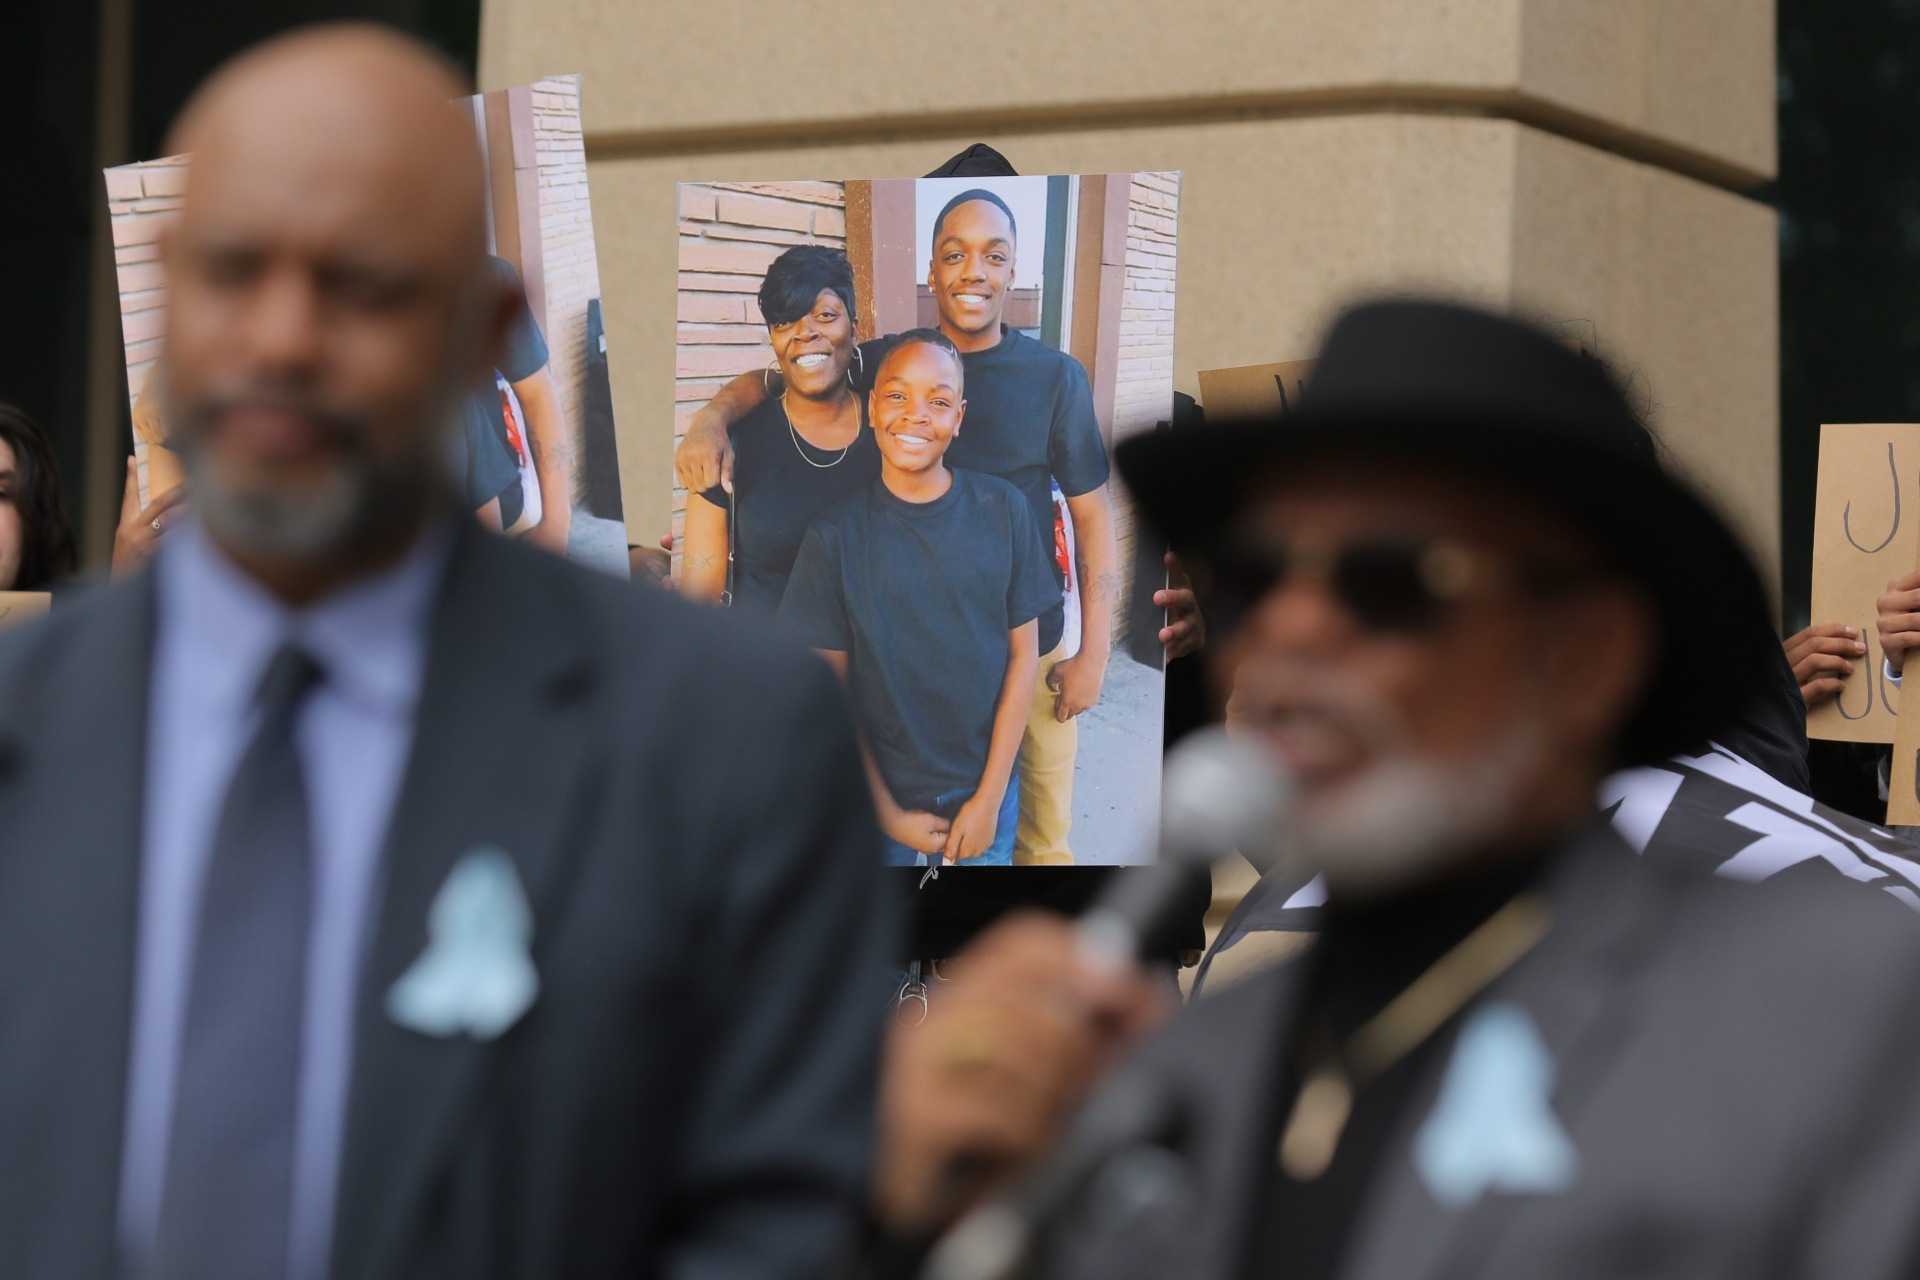 A photo of Jor&#039;Dell Da&#039;Shawn Richardson (in front) with his family is shown behind Dr. Thomas S. Mayes of The Greater Metro Denver Ministerial Alliance as he speaks.